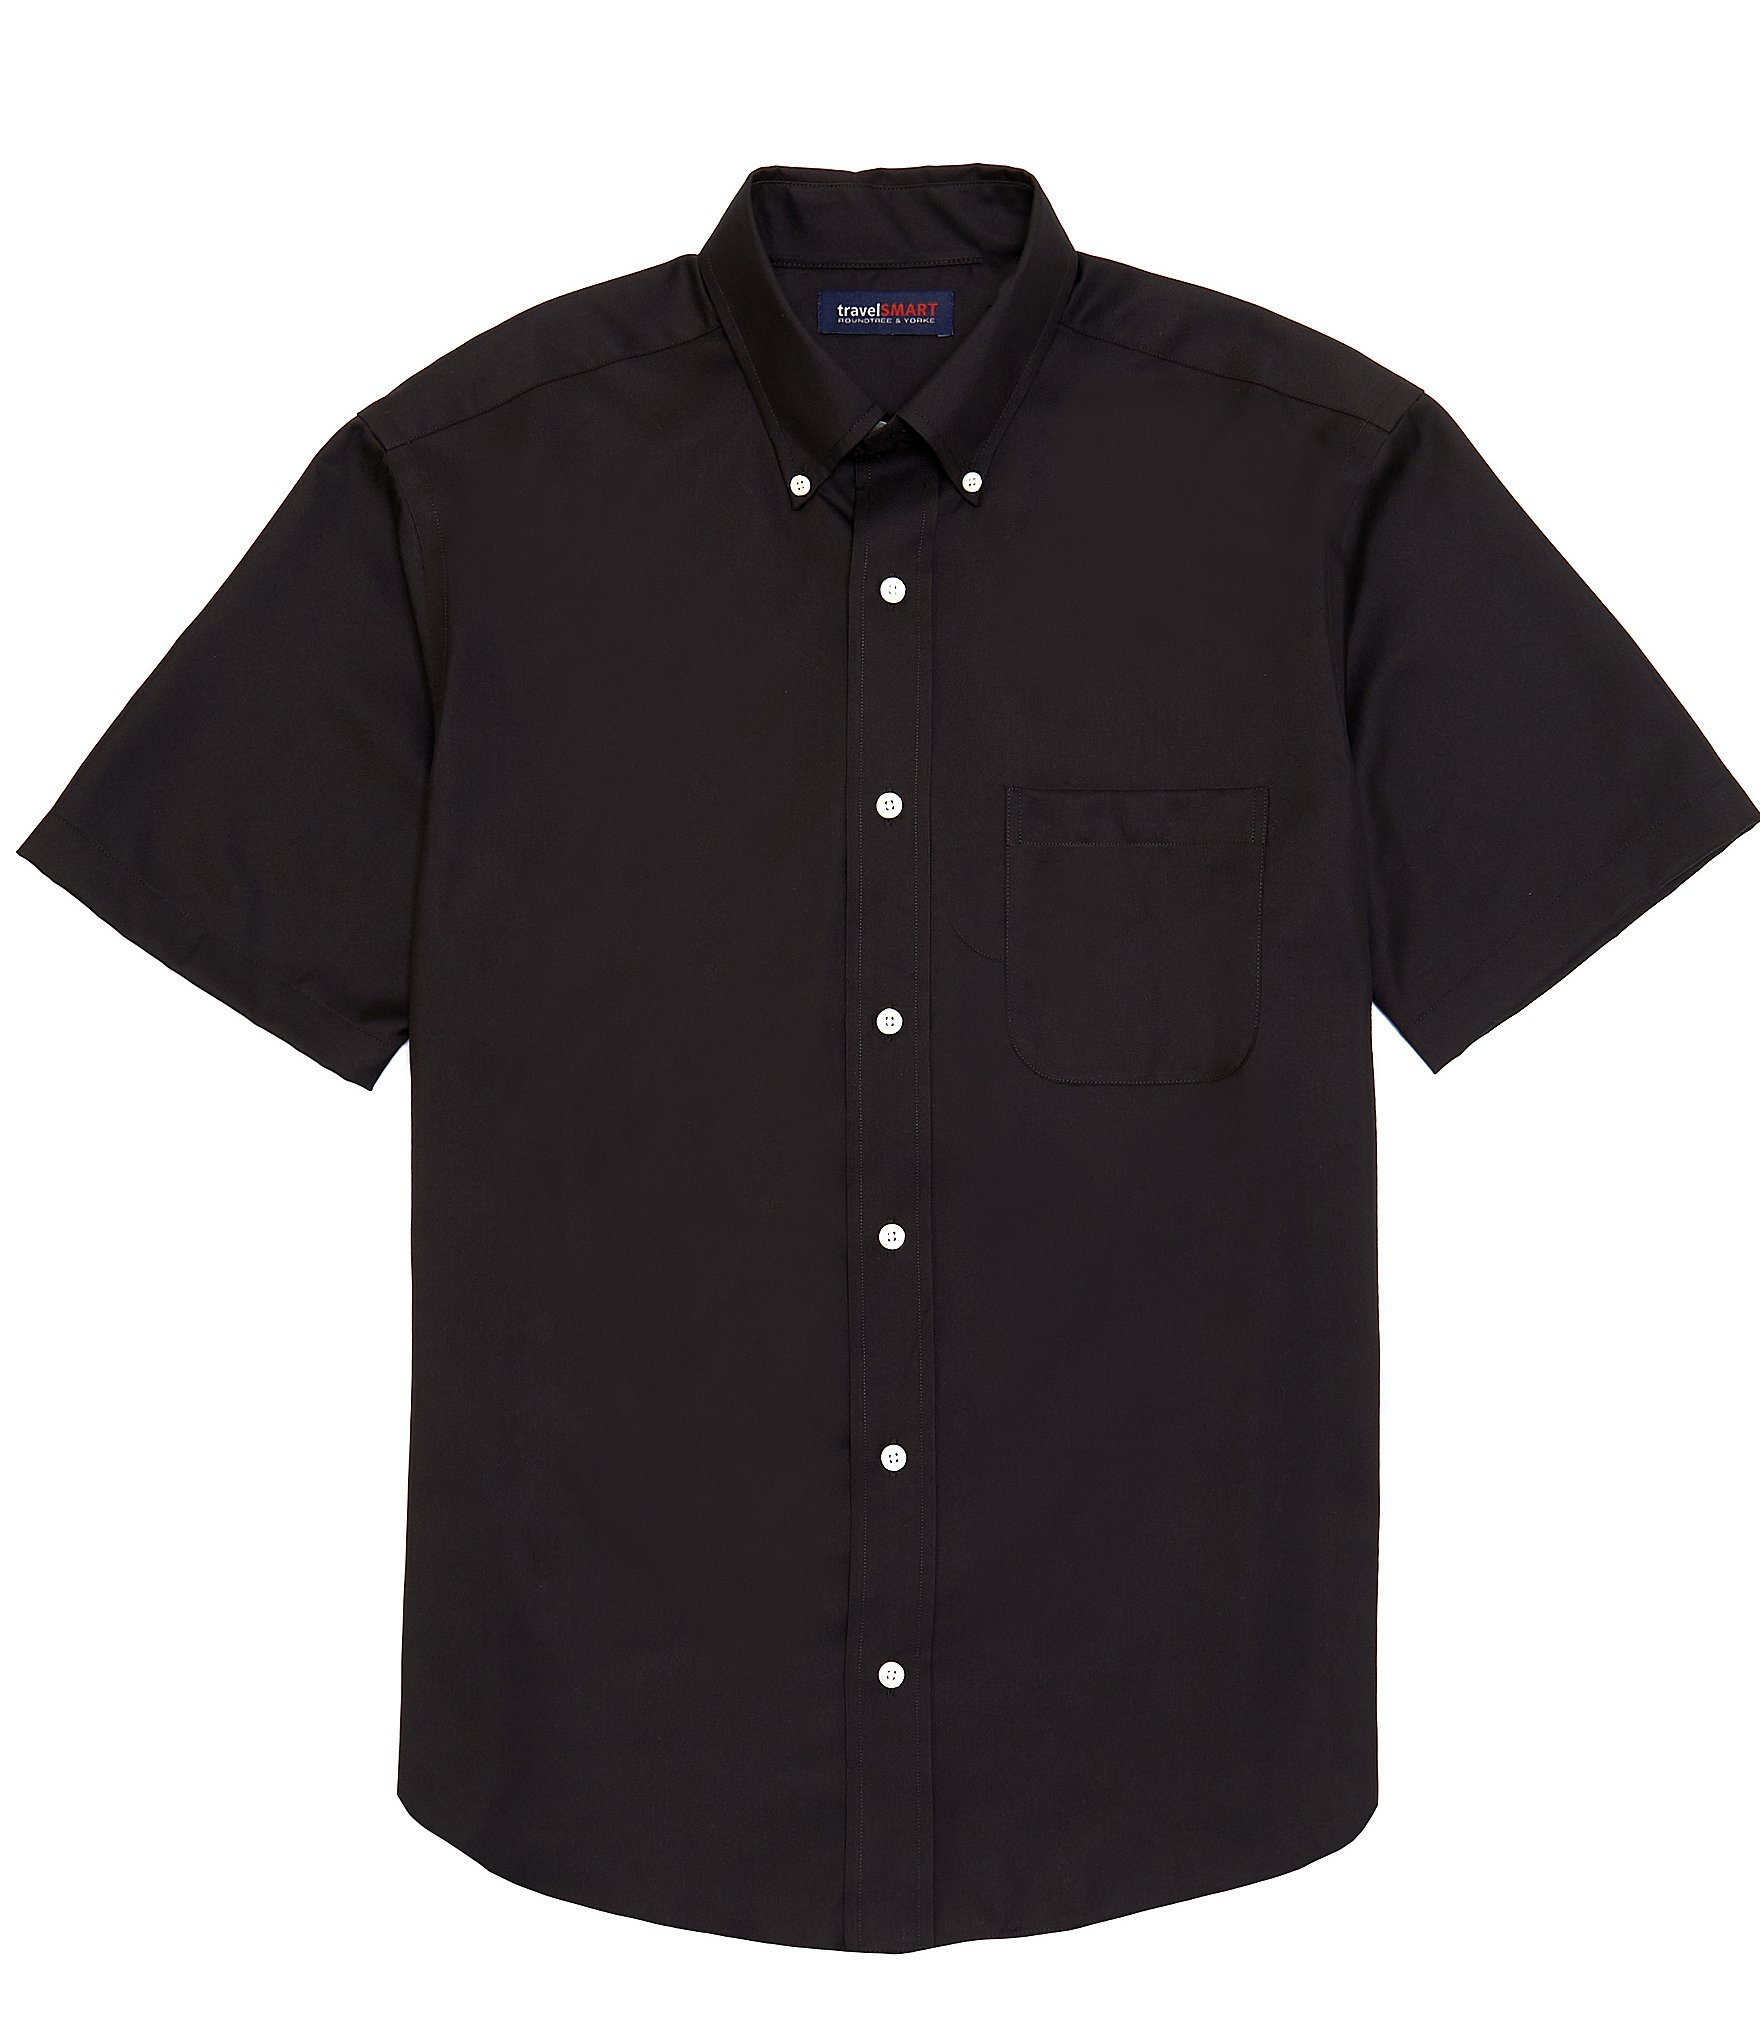 Roundtree & Yorke TravelSmart Short Sleeve Twill Solid Button Down ...